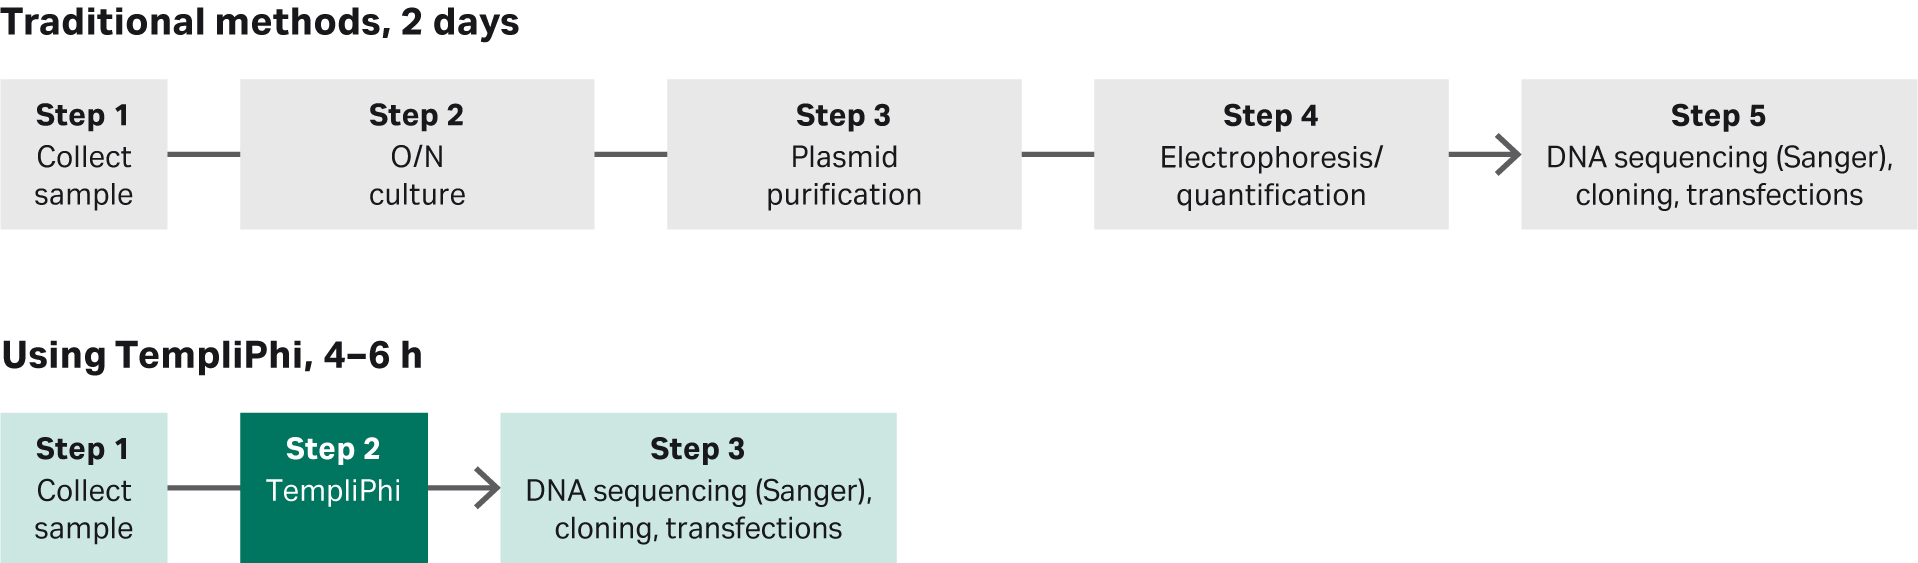 Schematic comparing traditional sequencing template preparation versus TempliPhi DNA amplification 